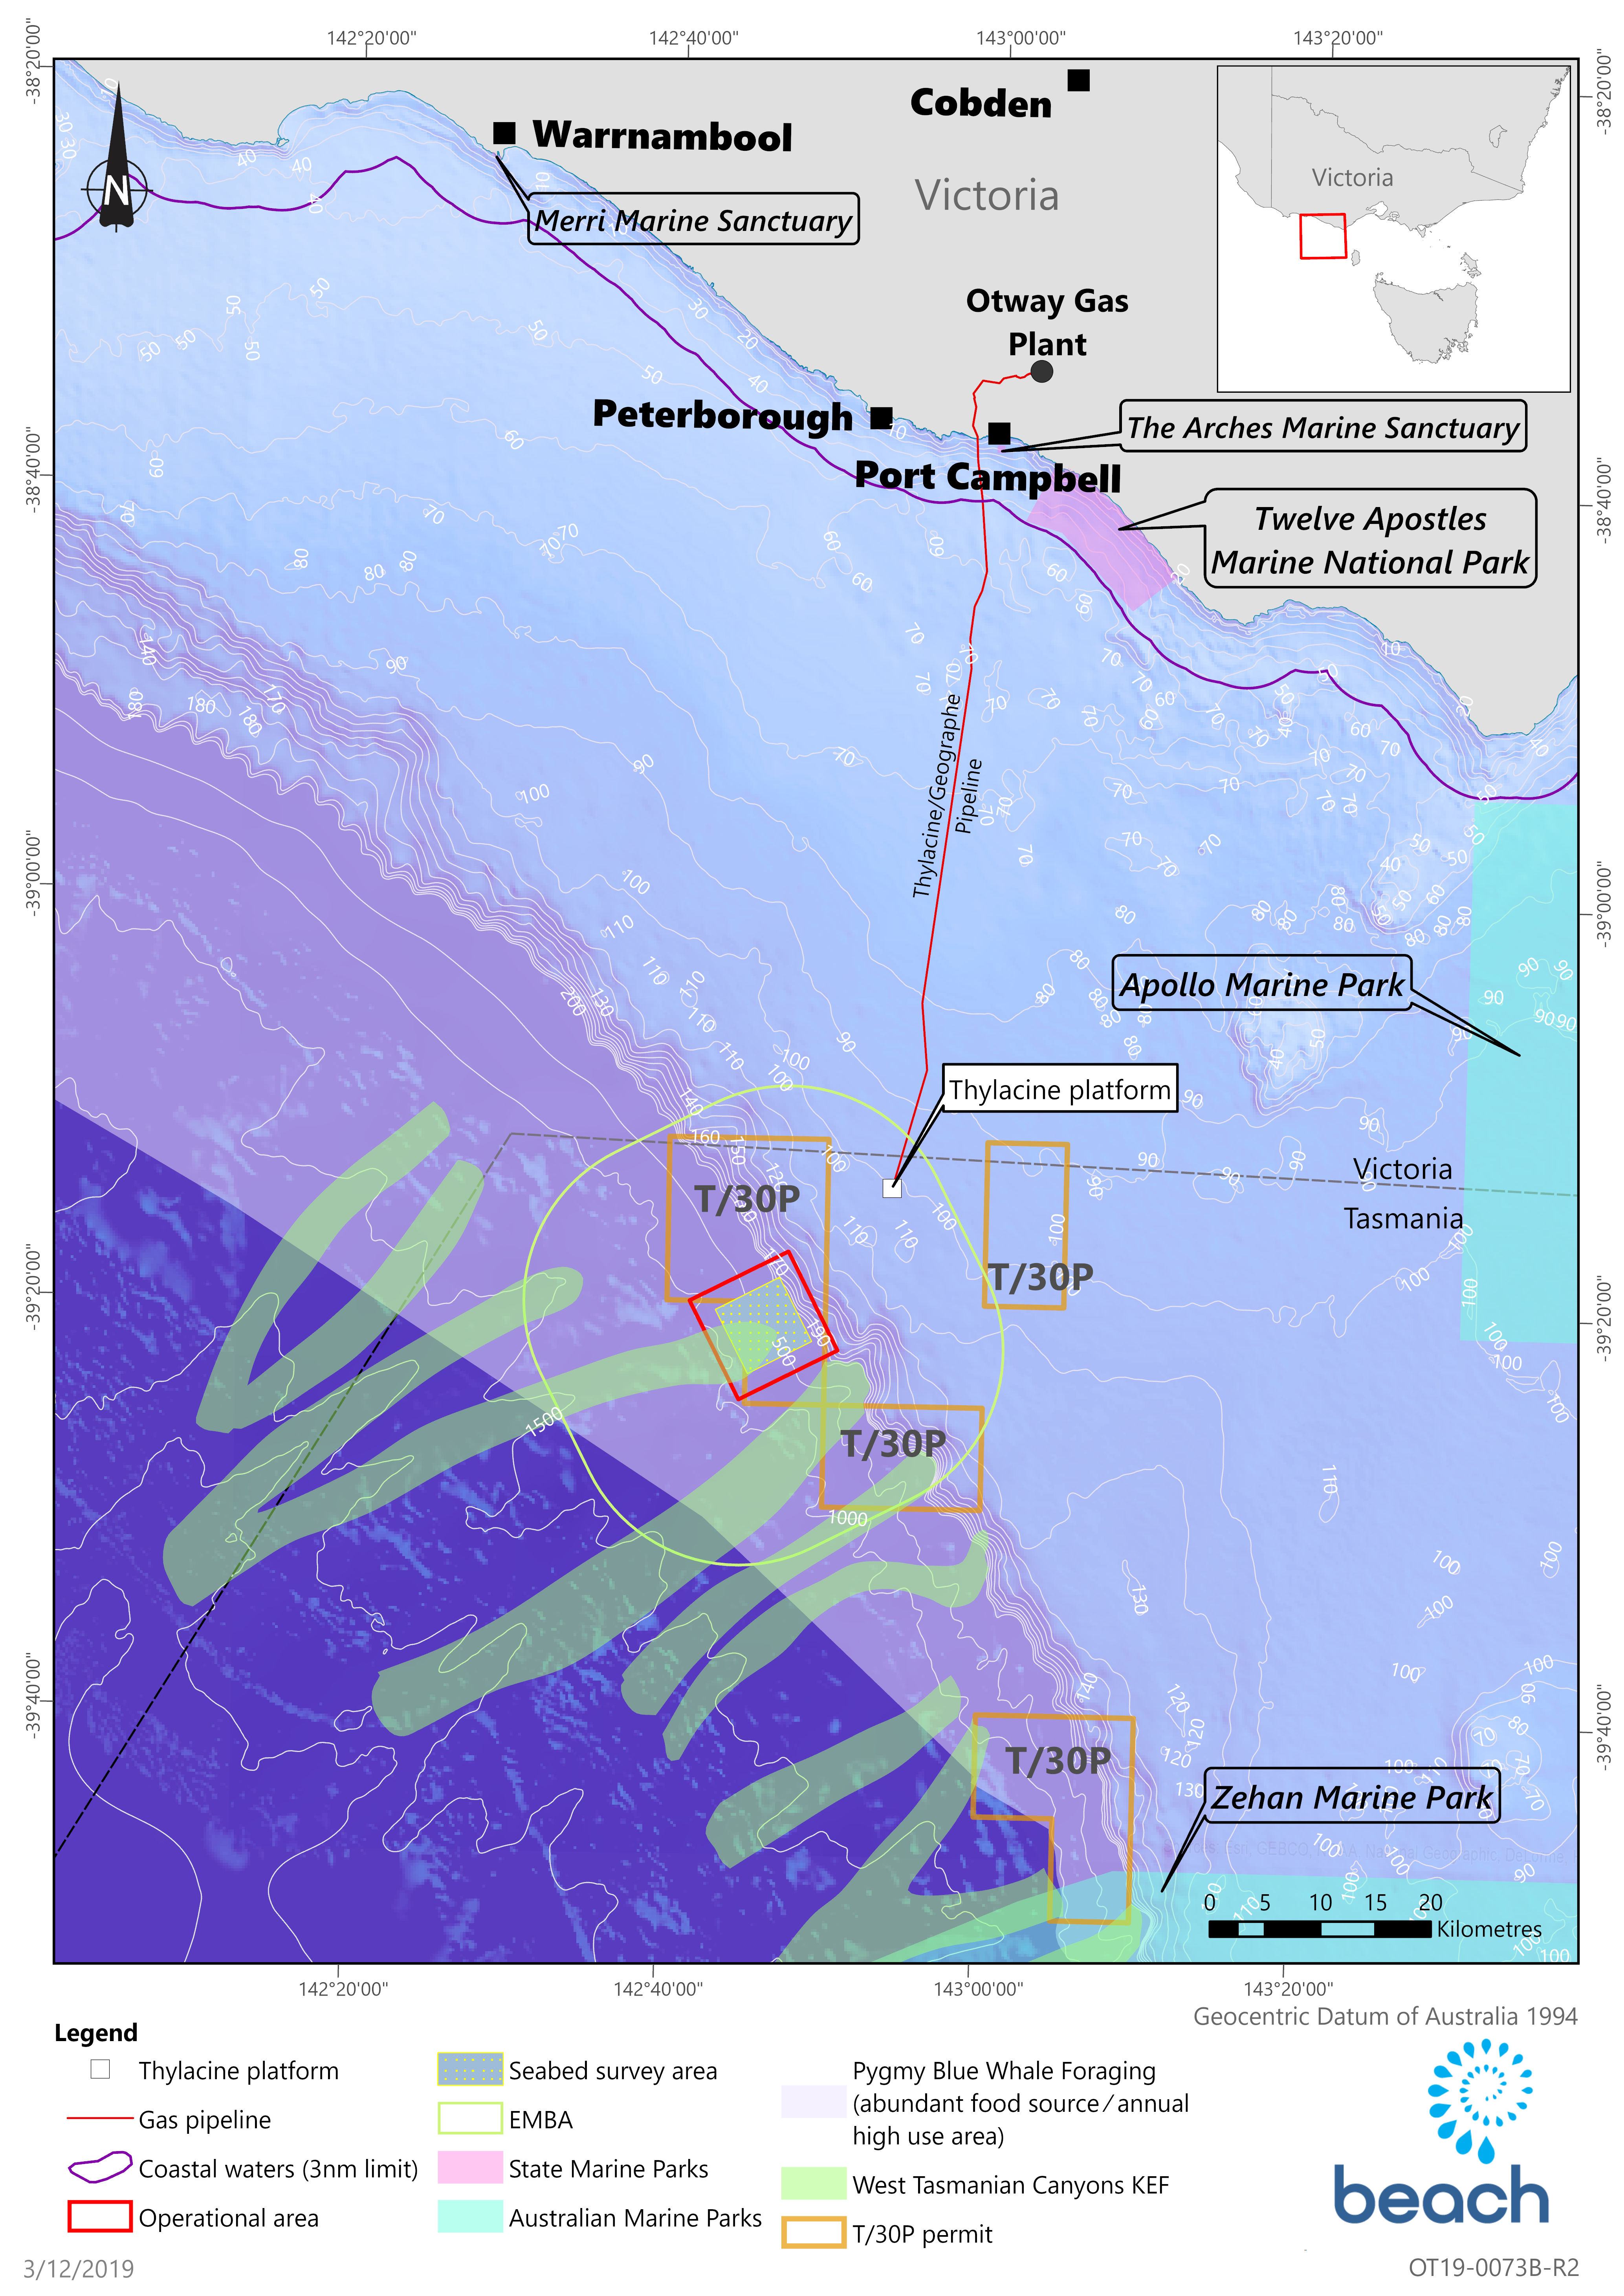 Location map - Activity: T/30P Geophysical and Geotechnical Seabed Survey (refer to description)